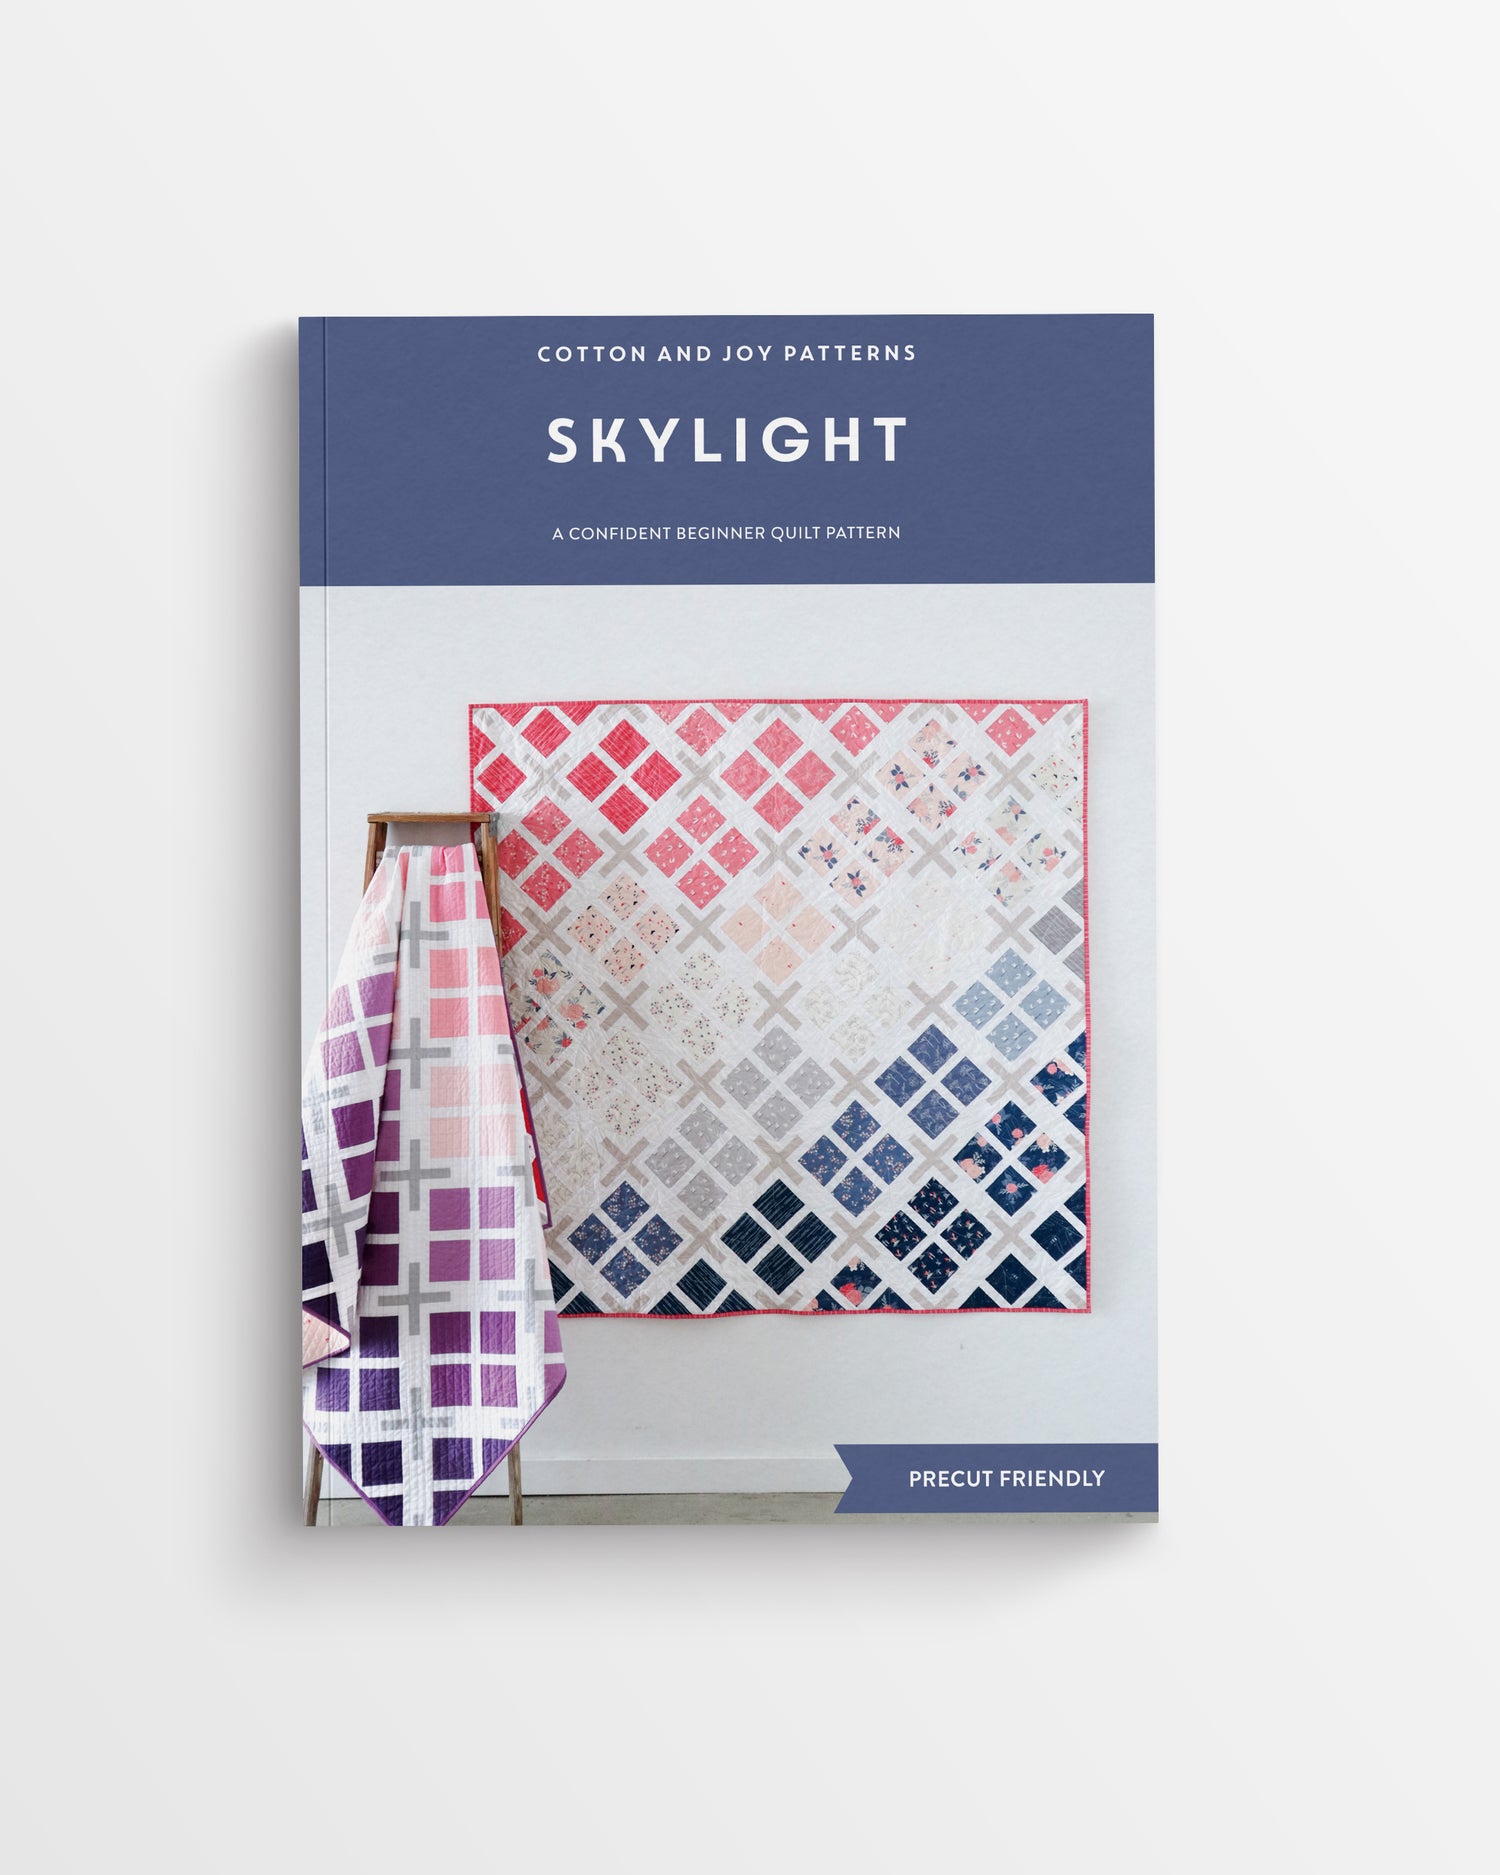 Quilt Patterns - Printed Booklets